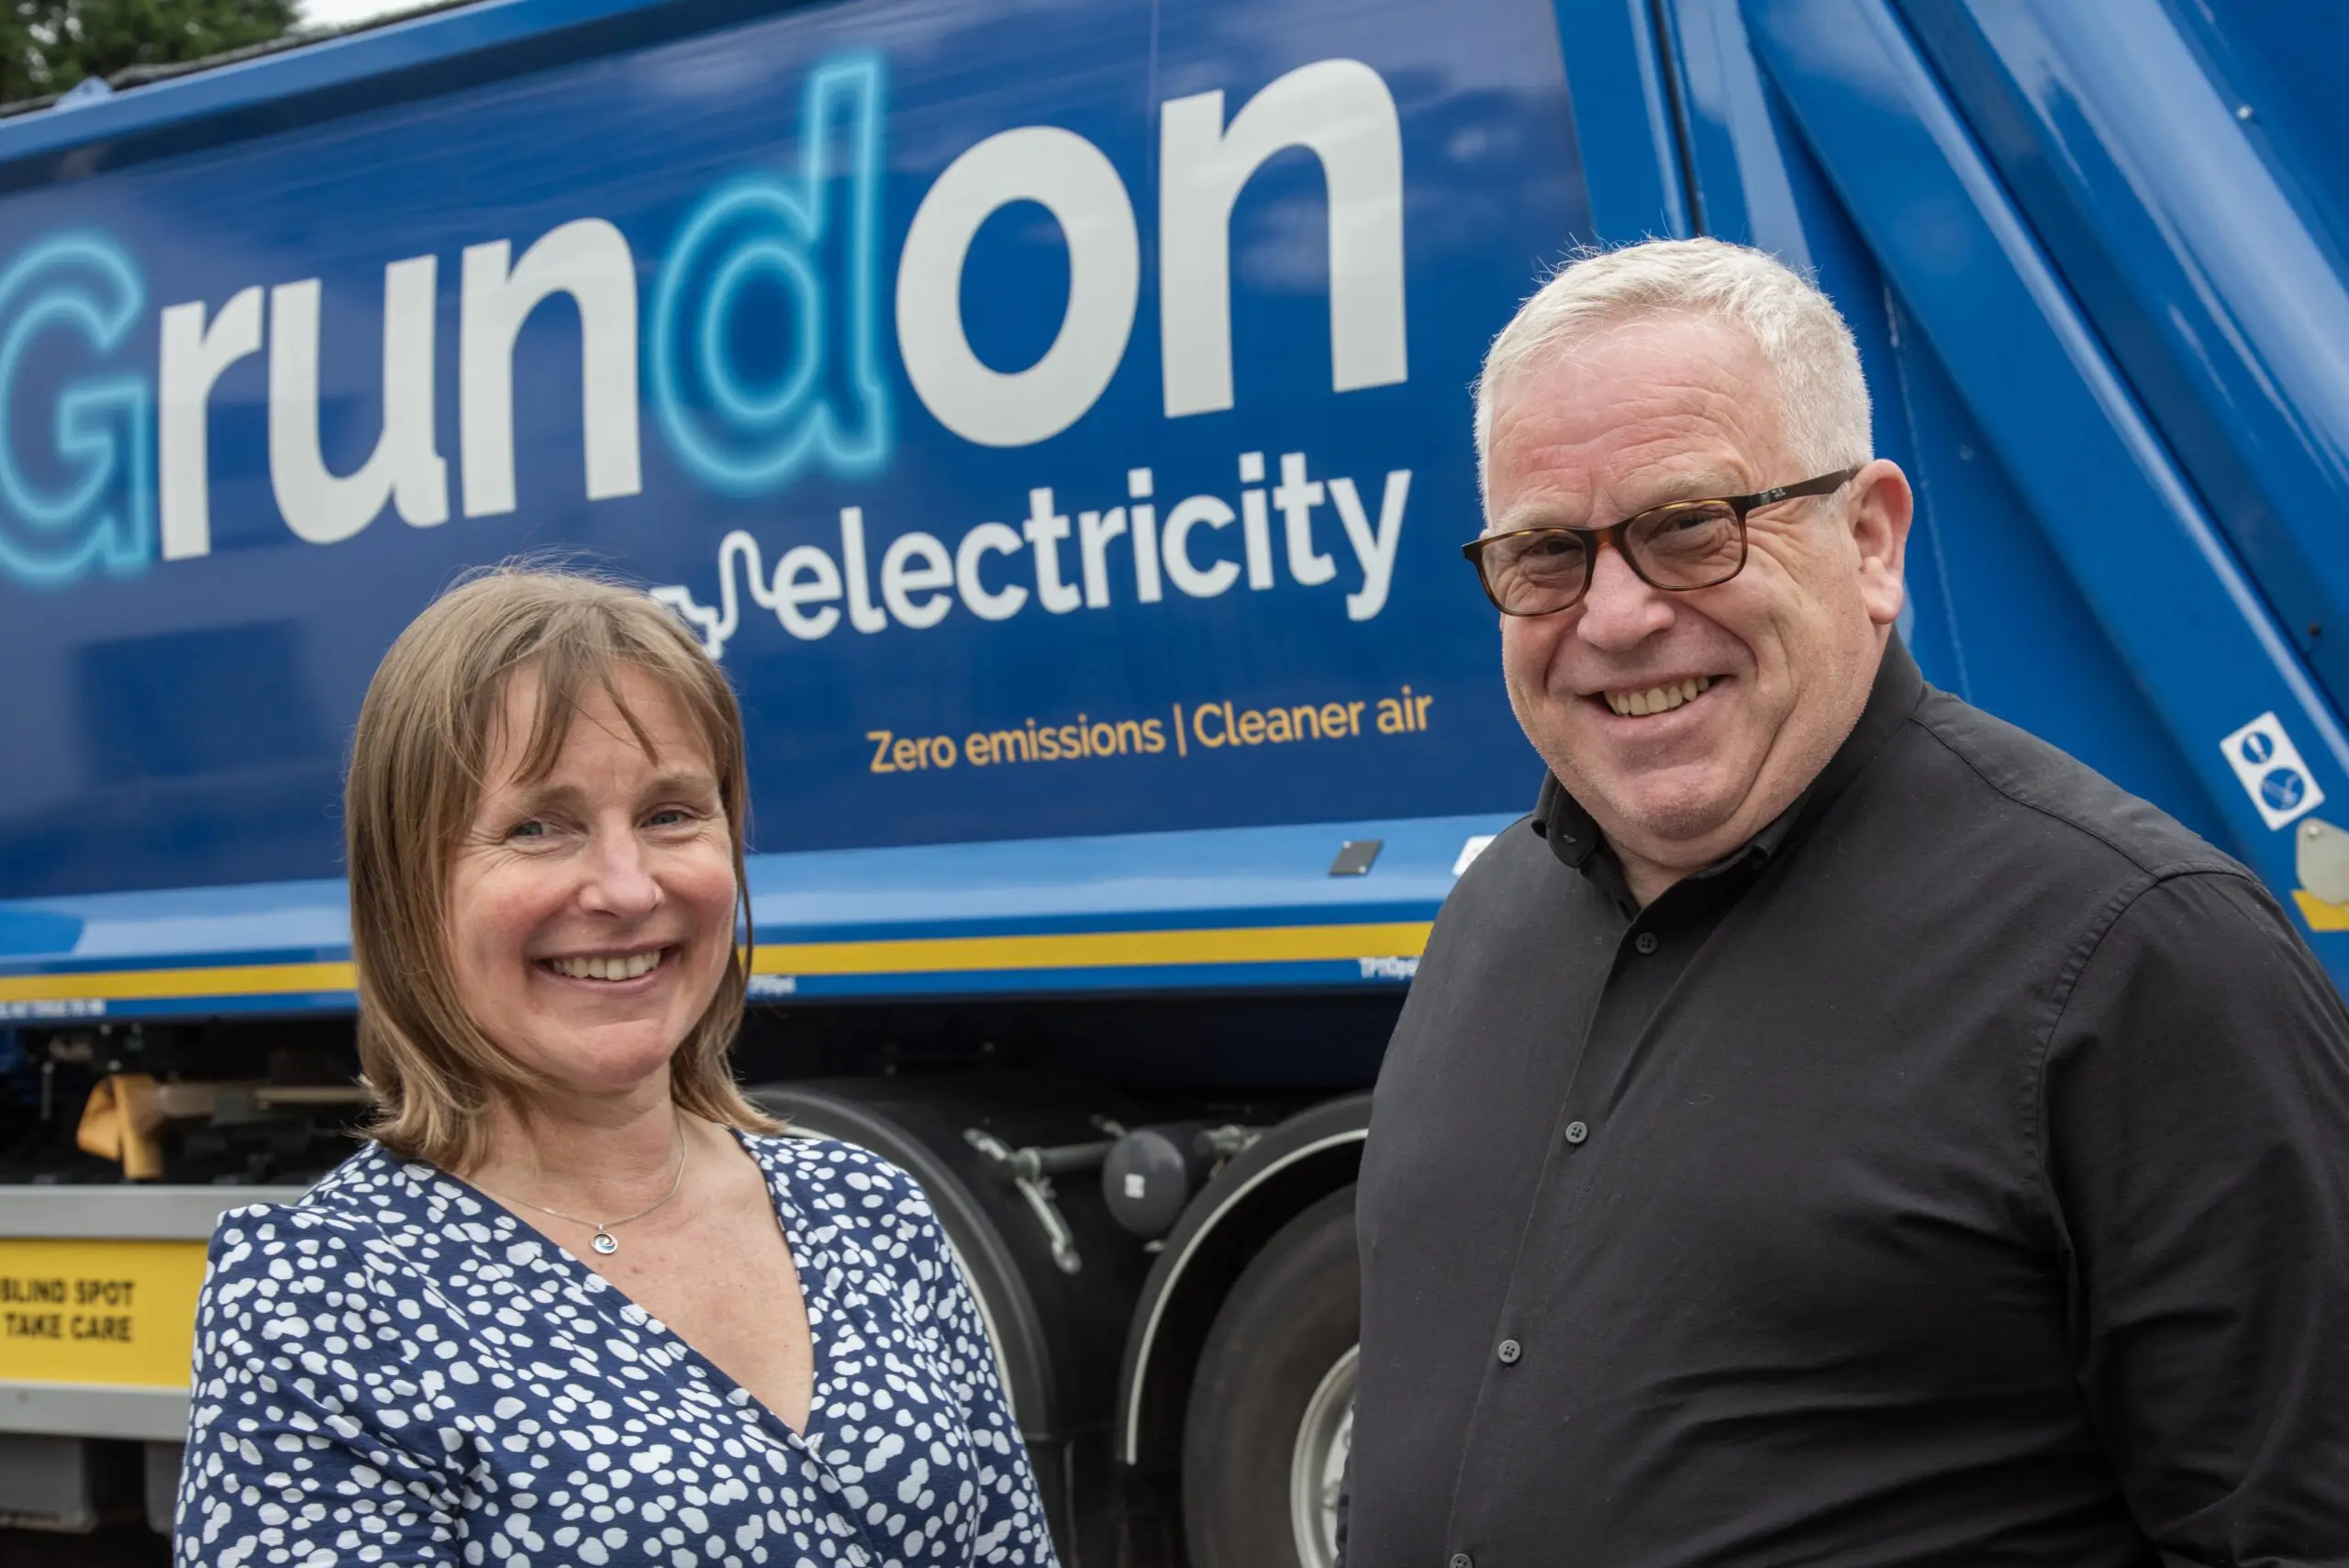 Grundon’s Becky Lillywhite is pictured with Liam Hogg in front of one of Grundon’s electric waste collection vehicles.